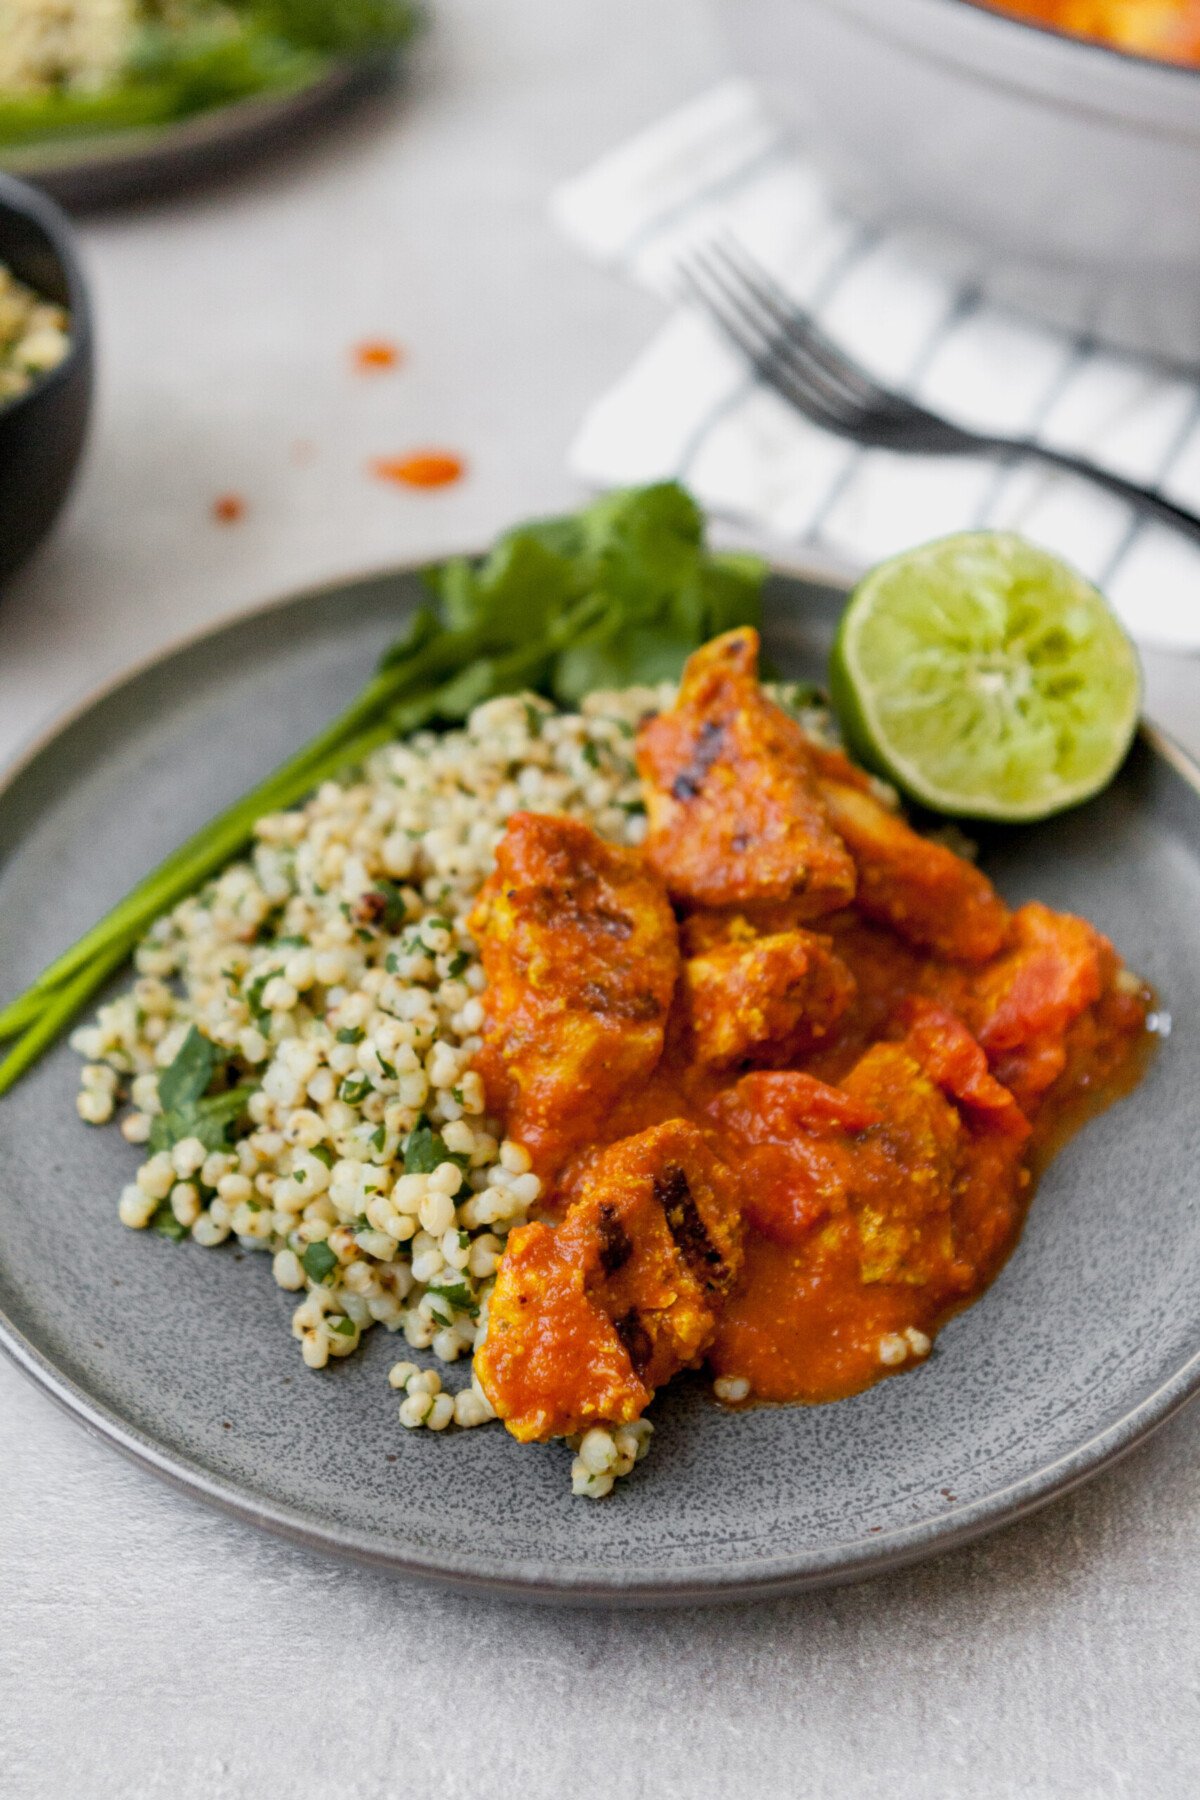 This Lightened Chicken Tikka Masala is full-flavored, healthy, and even a great make ahead meal. Atop a bed of cilantro-lime sorghum, this is classic, yet reinvented.  | from Lauren Grant of Zestful Kitchen